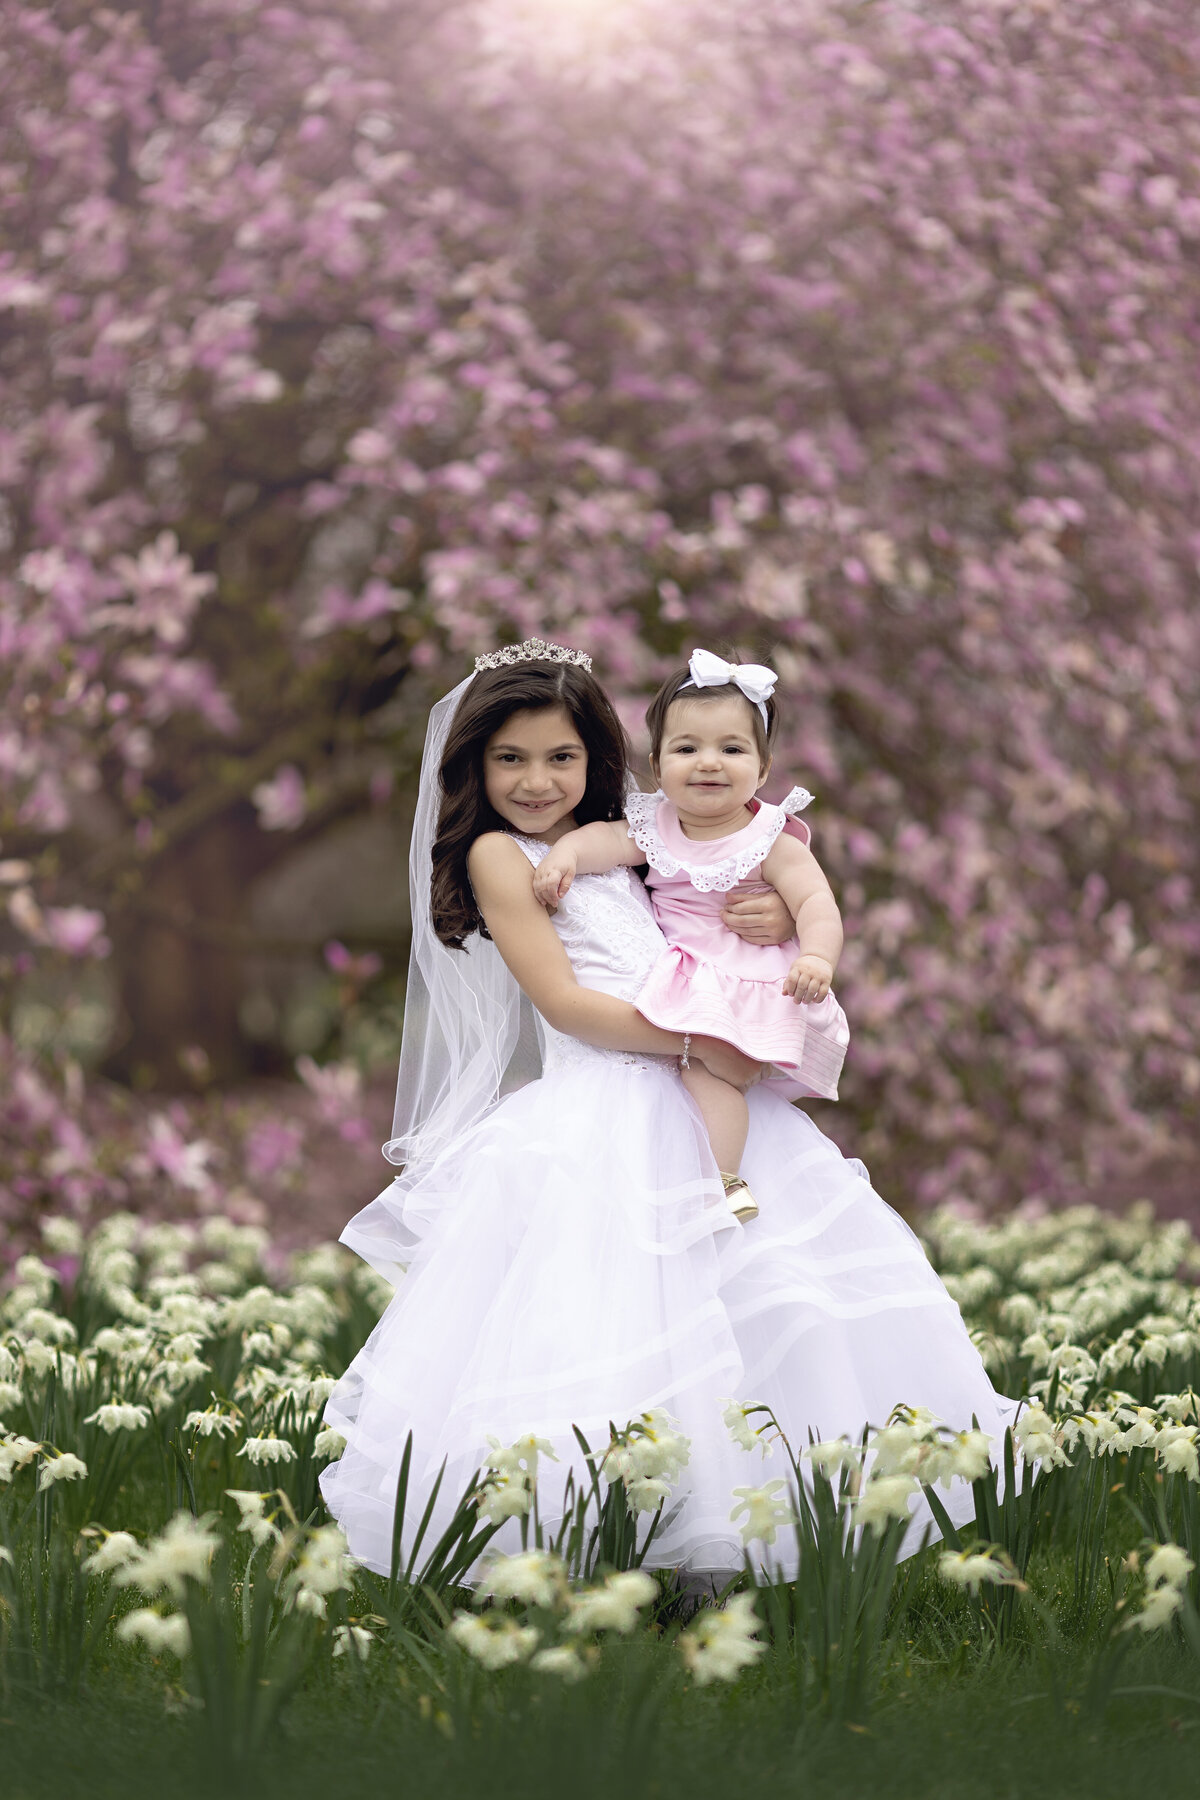 A young girl in a white dress and tiara holds her toddler baby sister in a pink dress in a field of white wildflowers